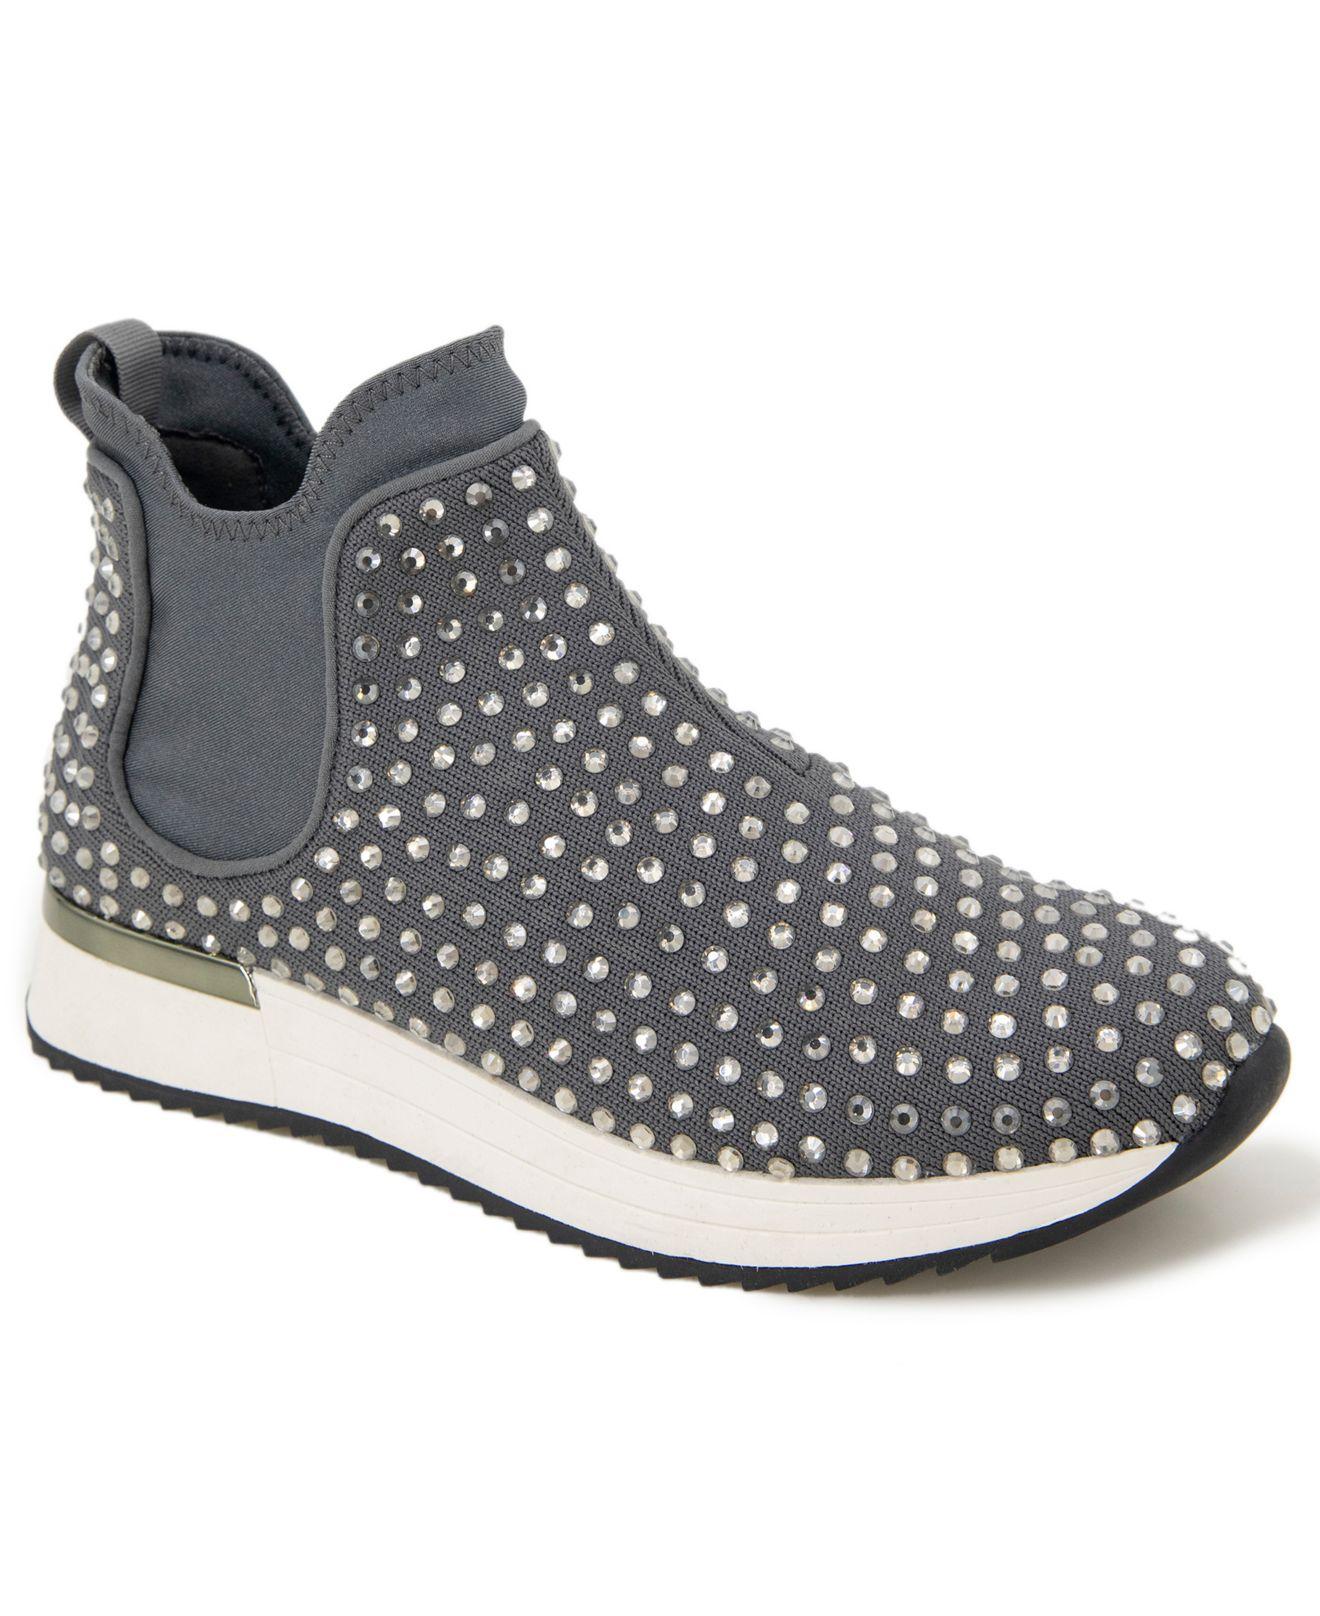 Kenneth Cole Reaction Lace Cameron Chelsea Jewel Sneakers in Dark Gray ...